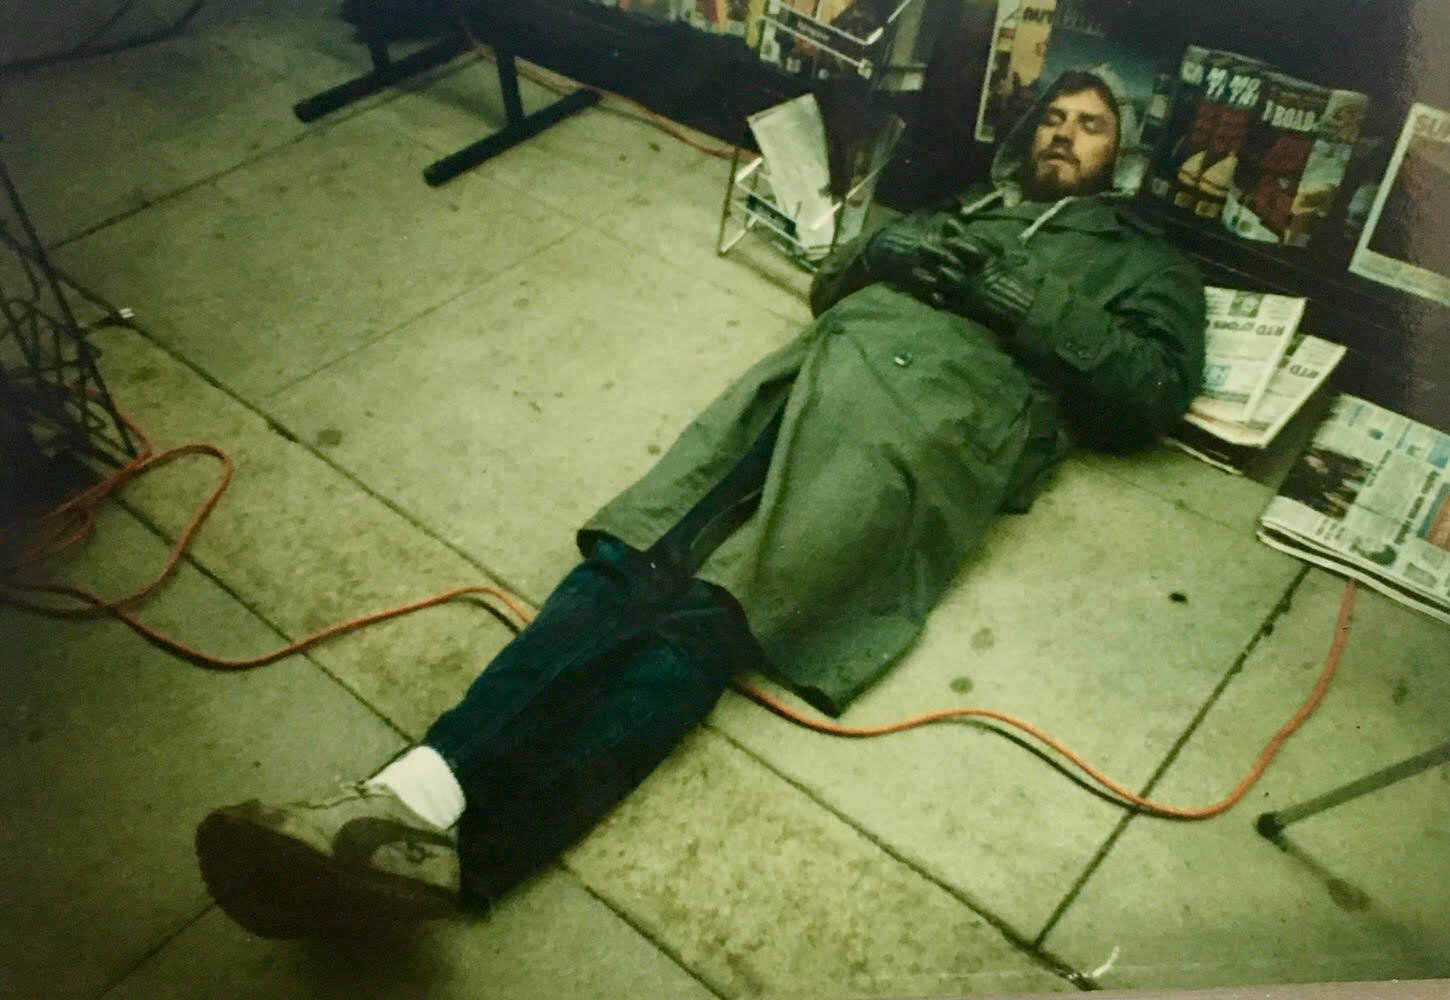  Dan sleeping on the set of Susan’s student film, at an all-night shoot at a newsstand off Melrose Ave. 